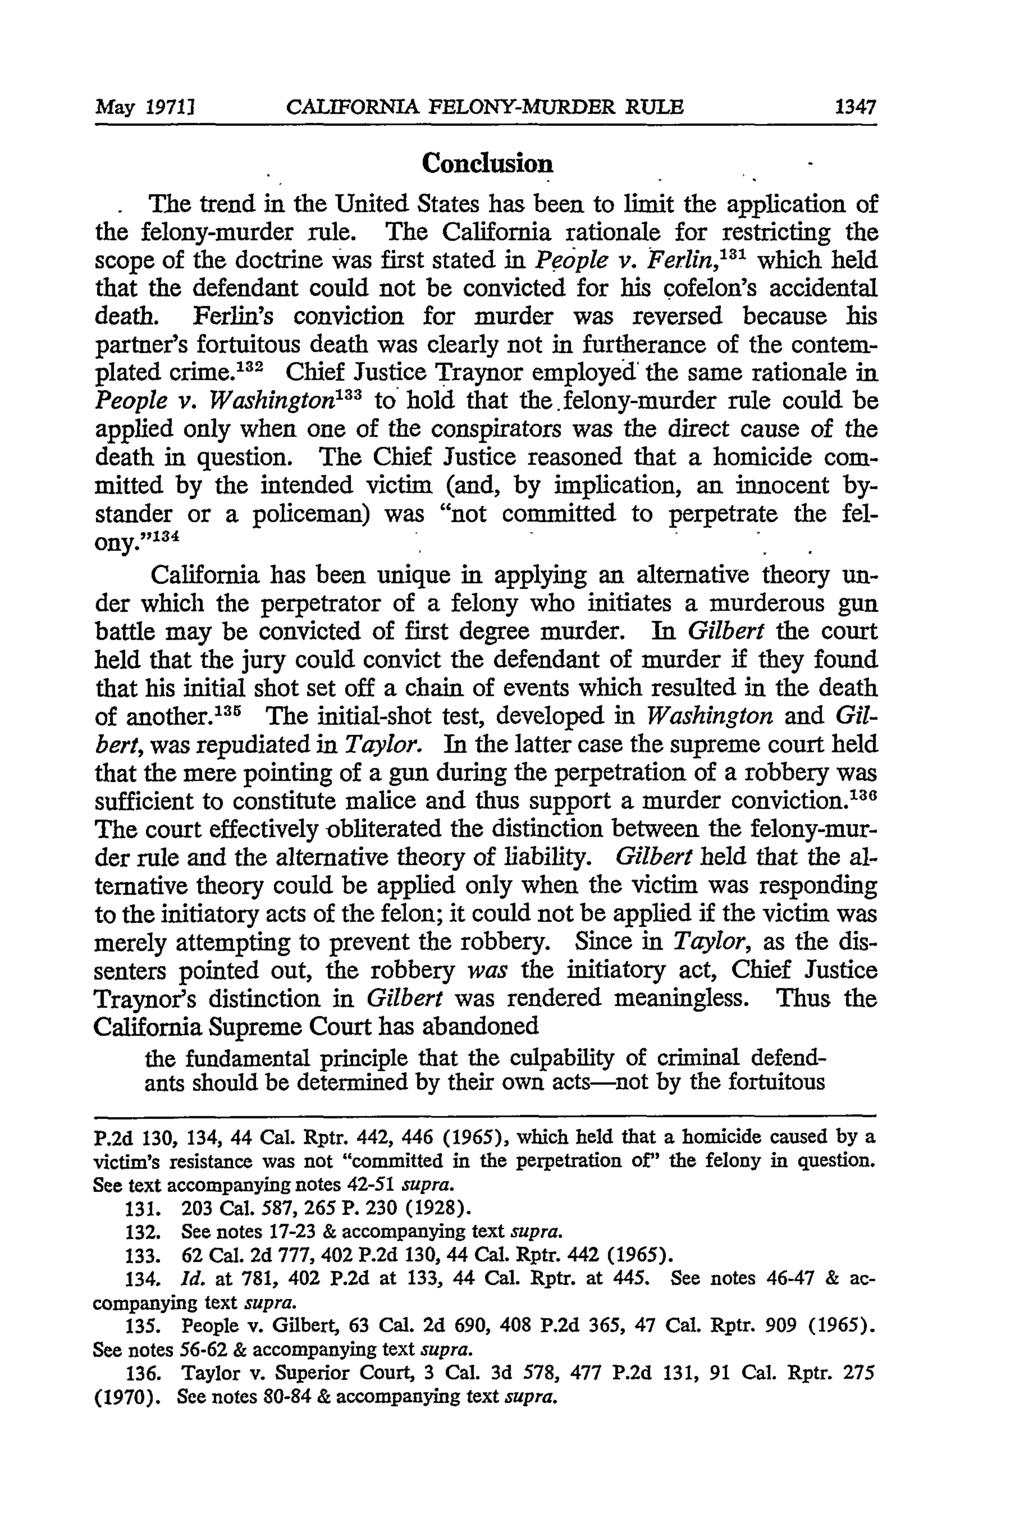 May 19713 CALIFORNIA FELONY-MURDER RULE Conclusion The trend in the United States has been to limit the application of the felony-murder rule.